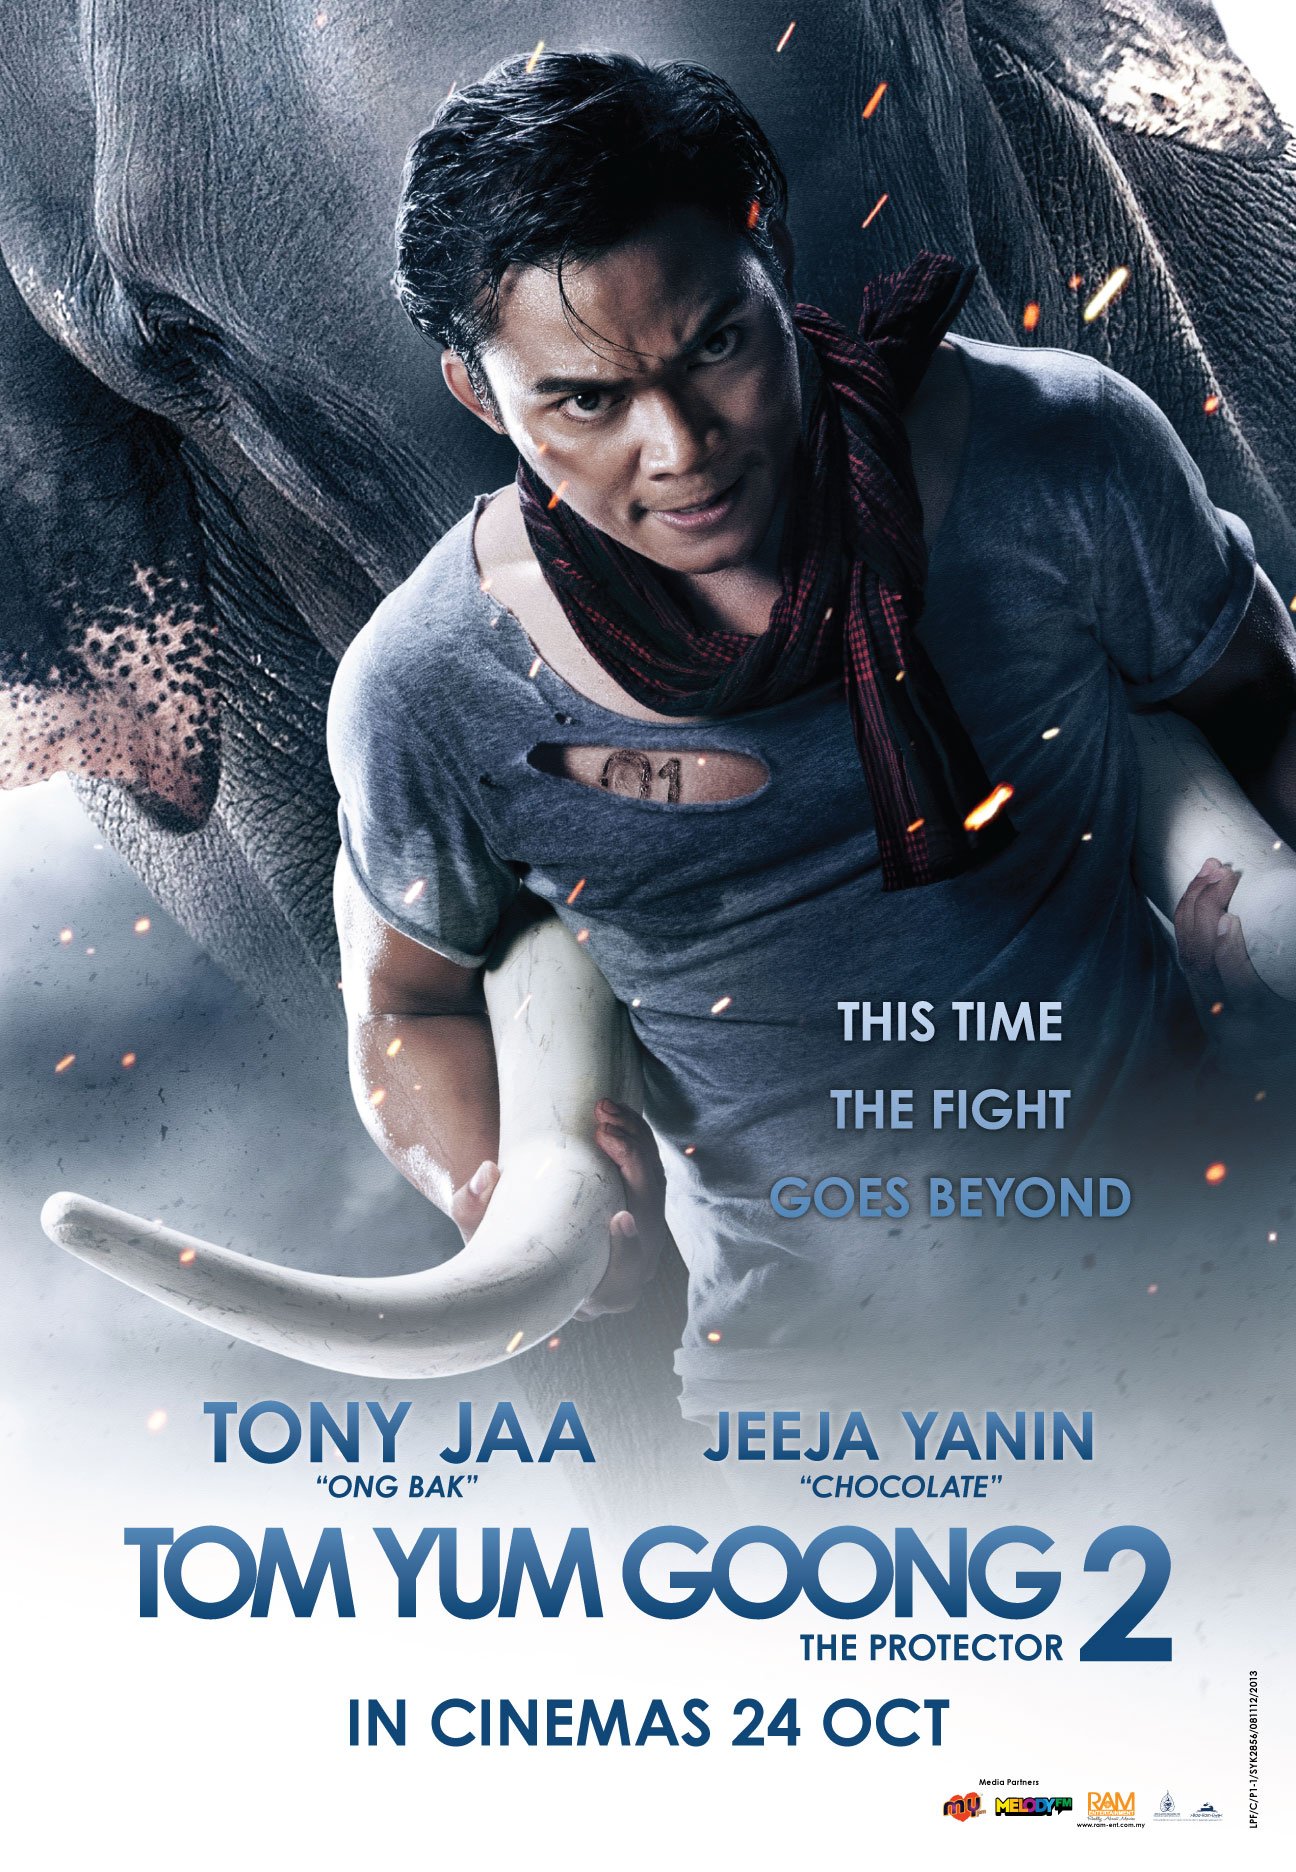 Thai poster of the movie Tom yum goong 2